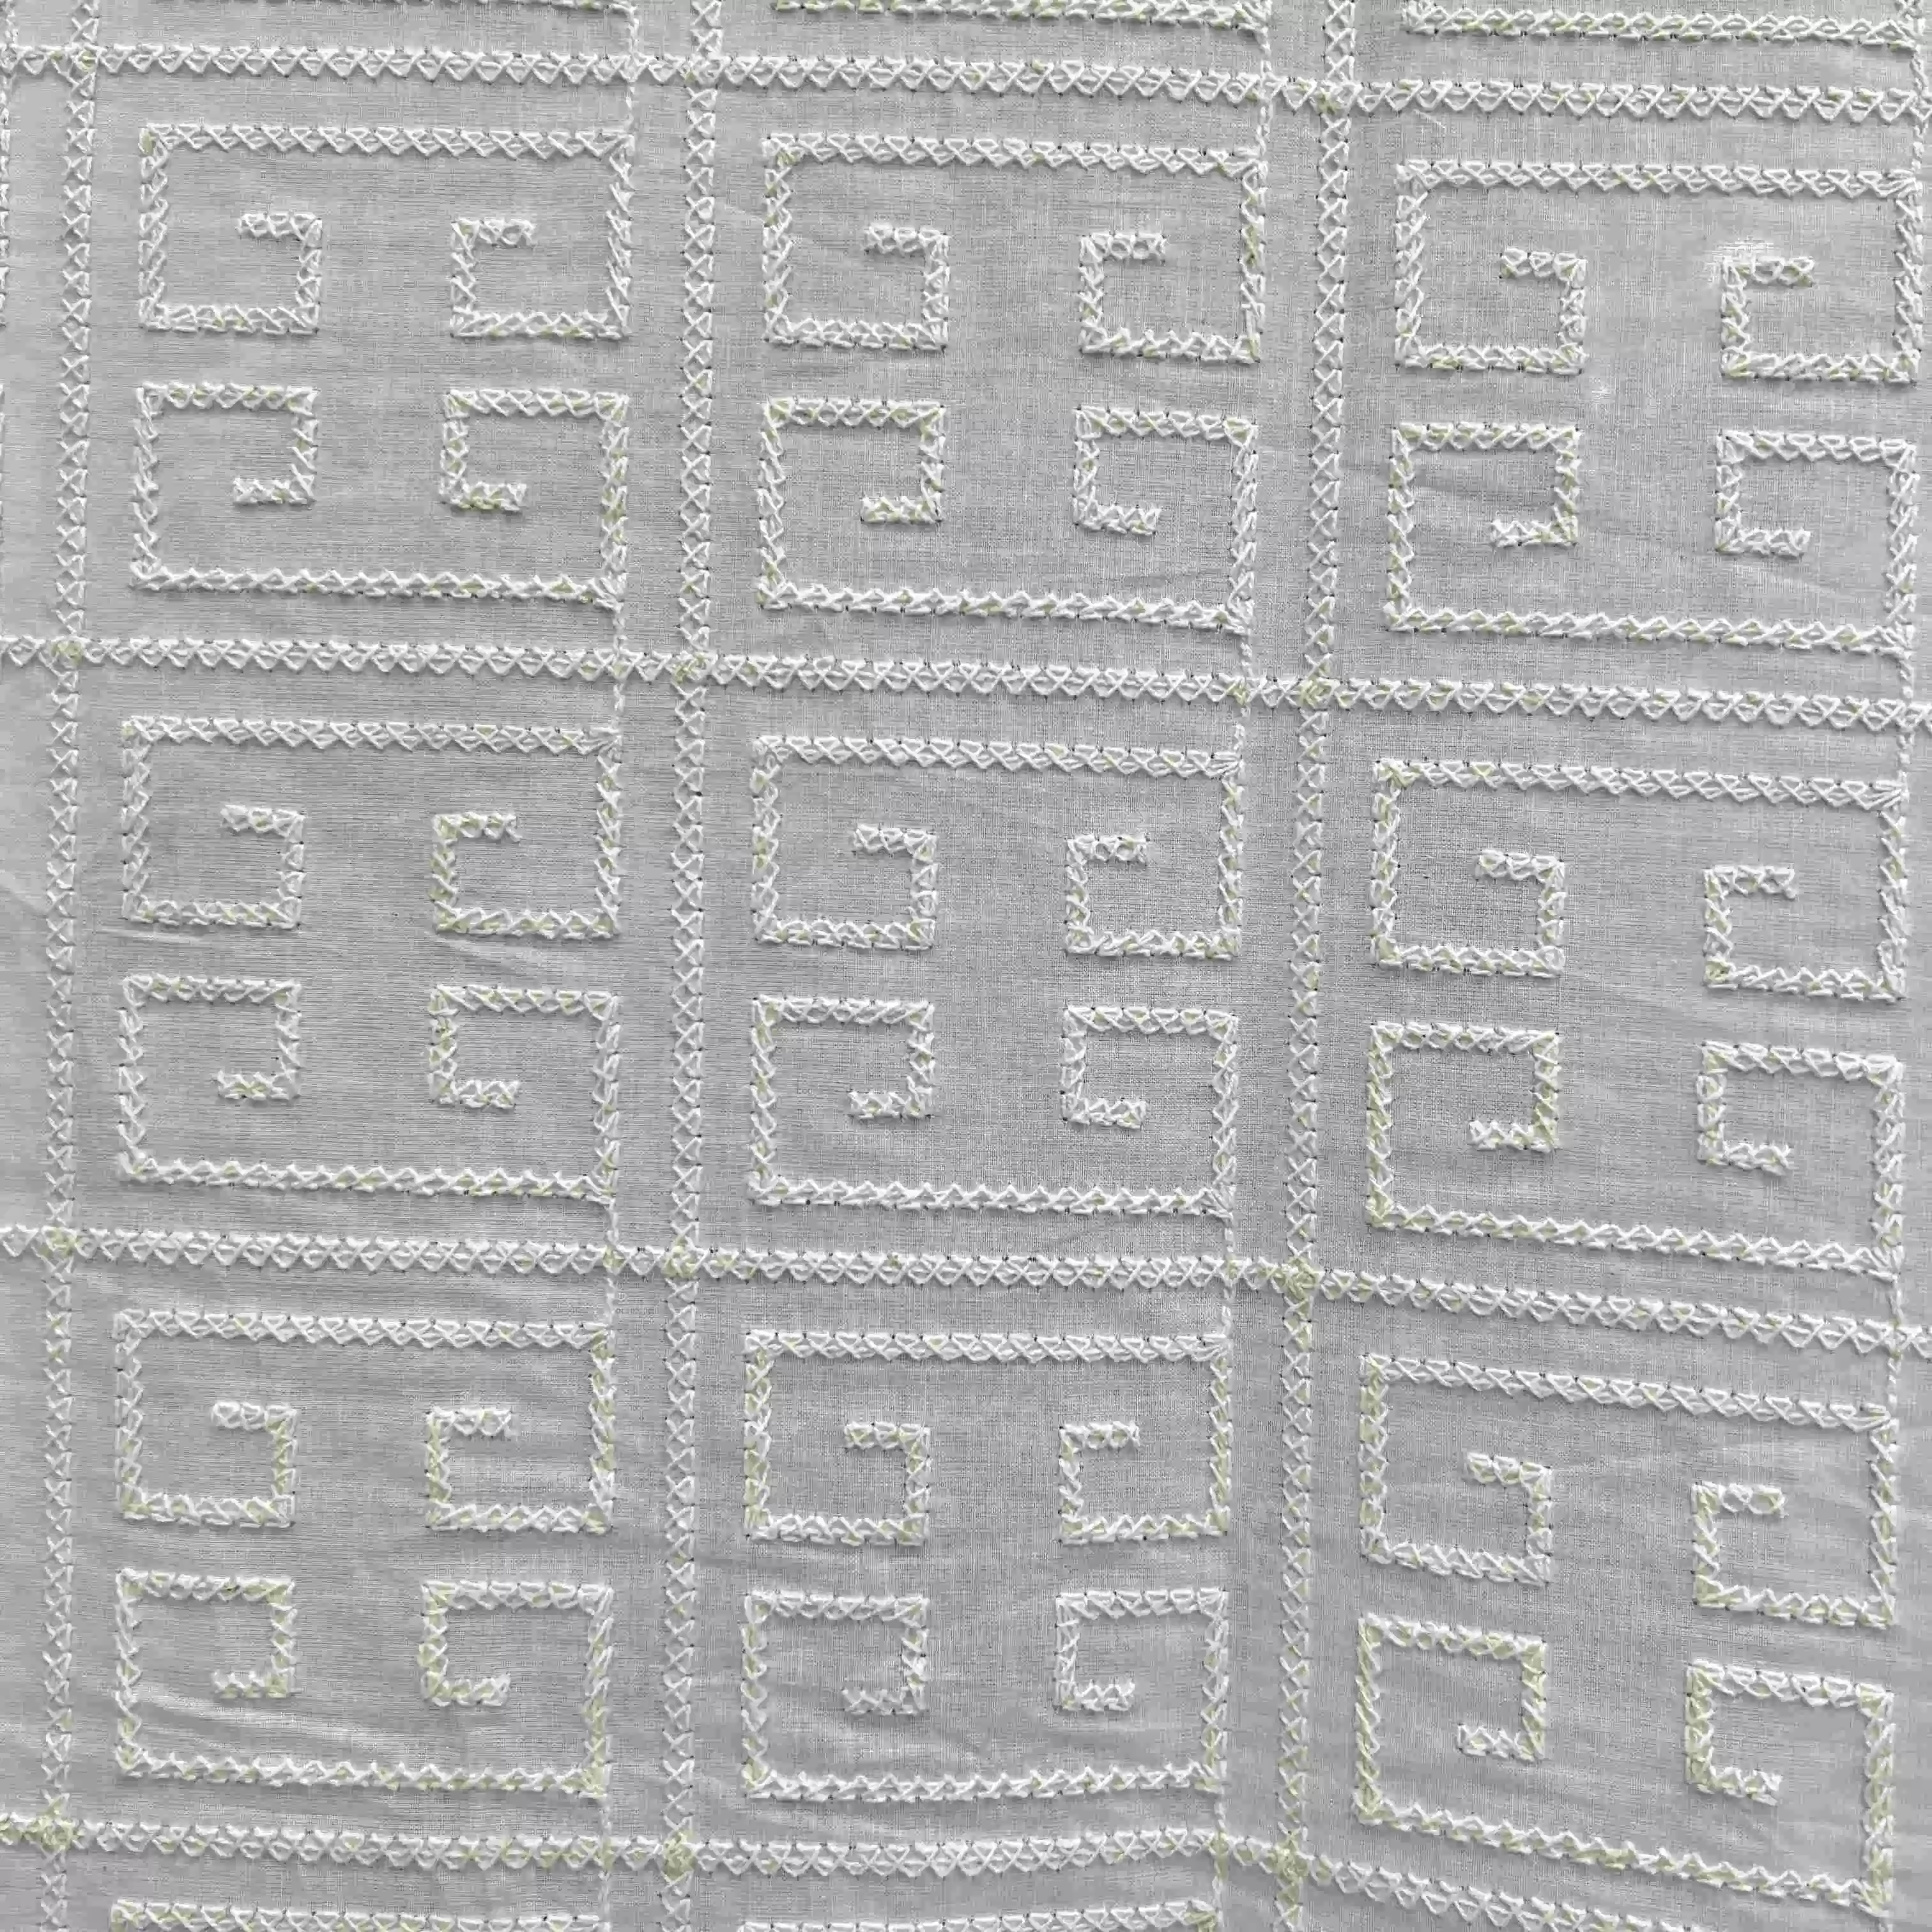 Gxf237 Rope Embroidery Cotton Embroidery Lace Fabric